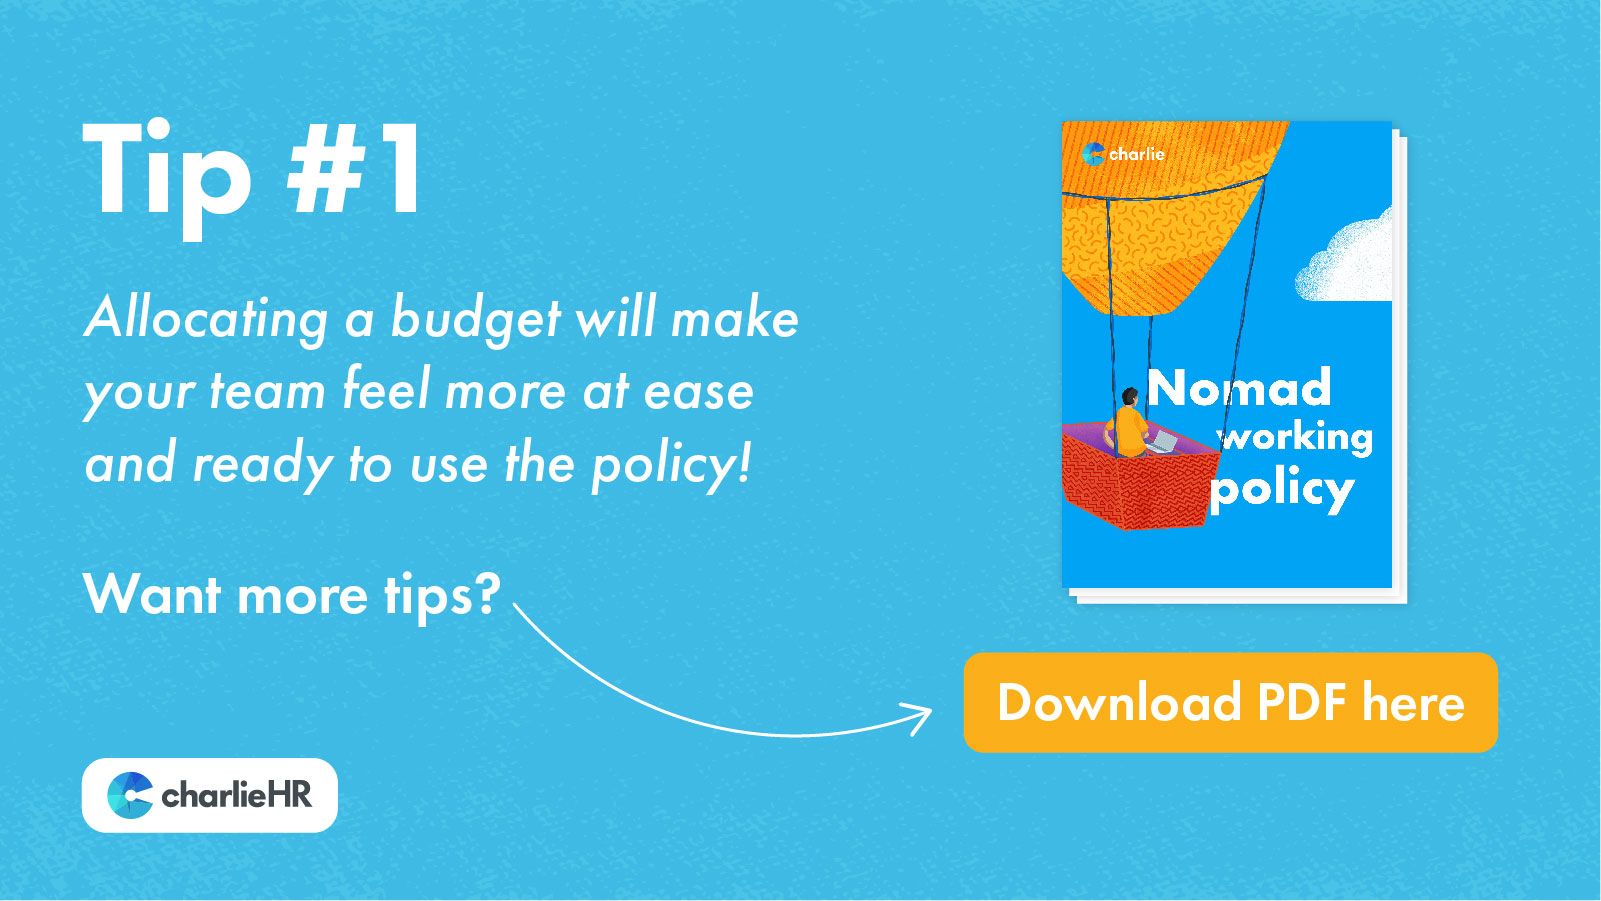 Click here to donwload our Nomad working policy and all the tips you need to implement it